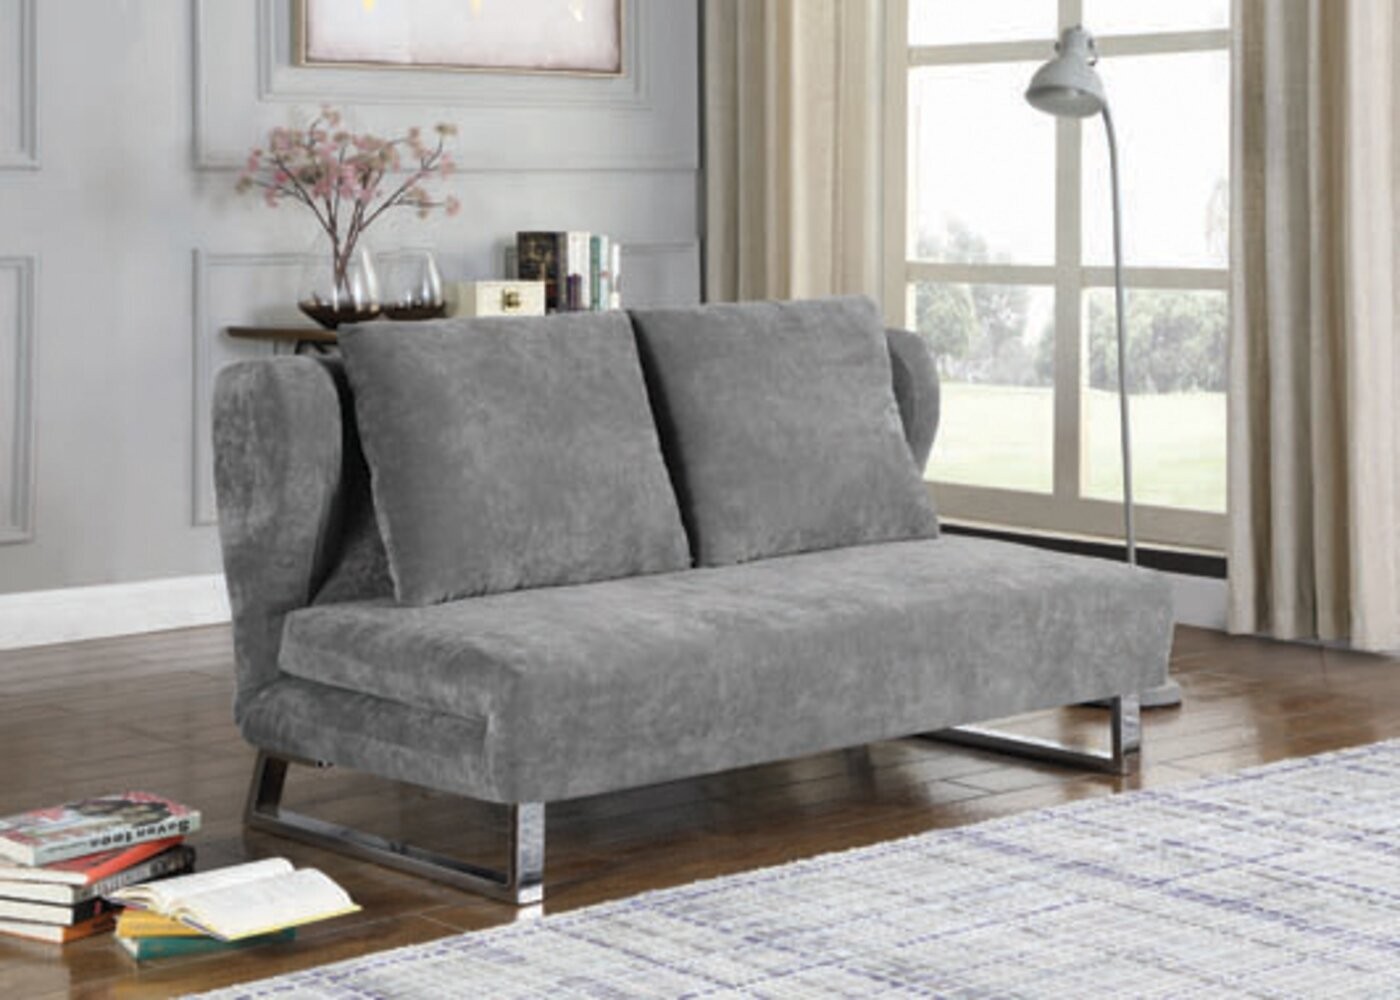 60 inch sectional sofa with wide seat and sofa bed